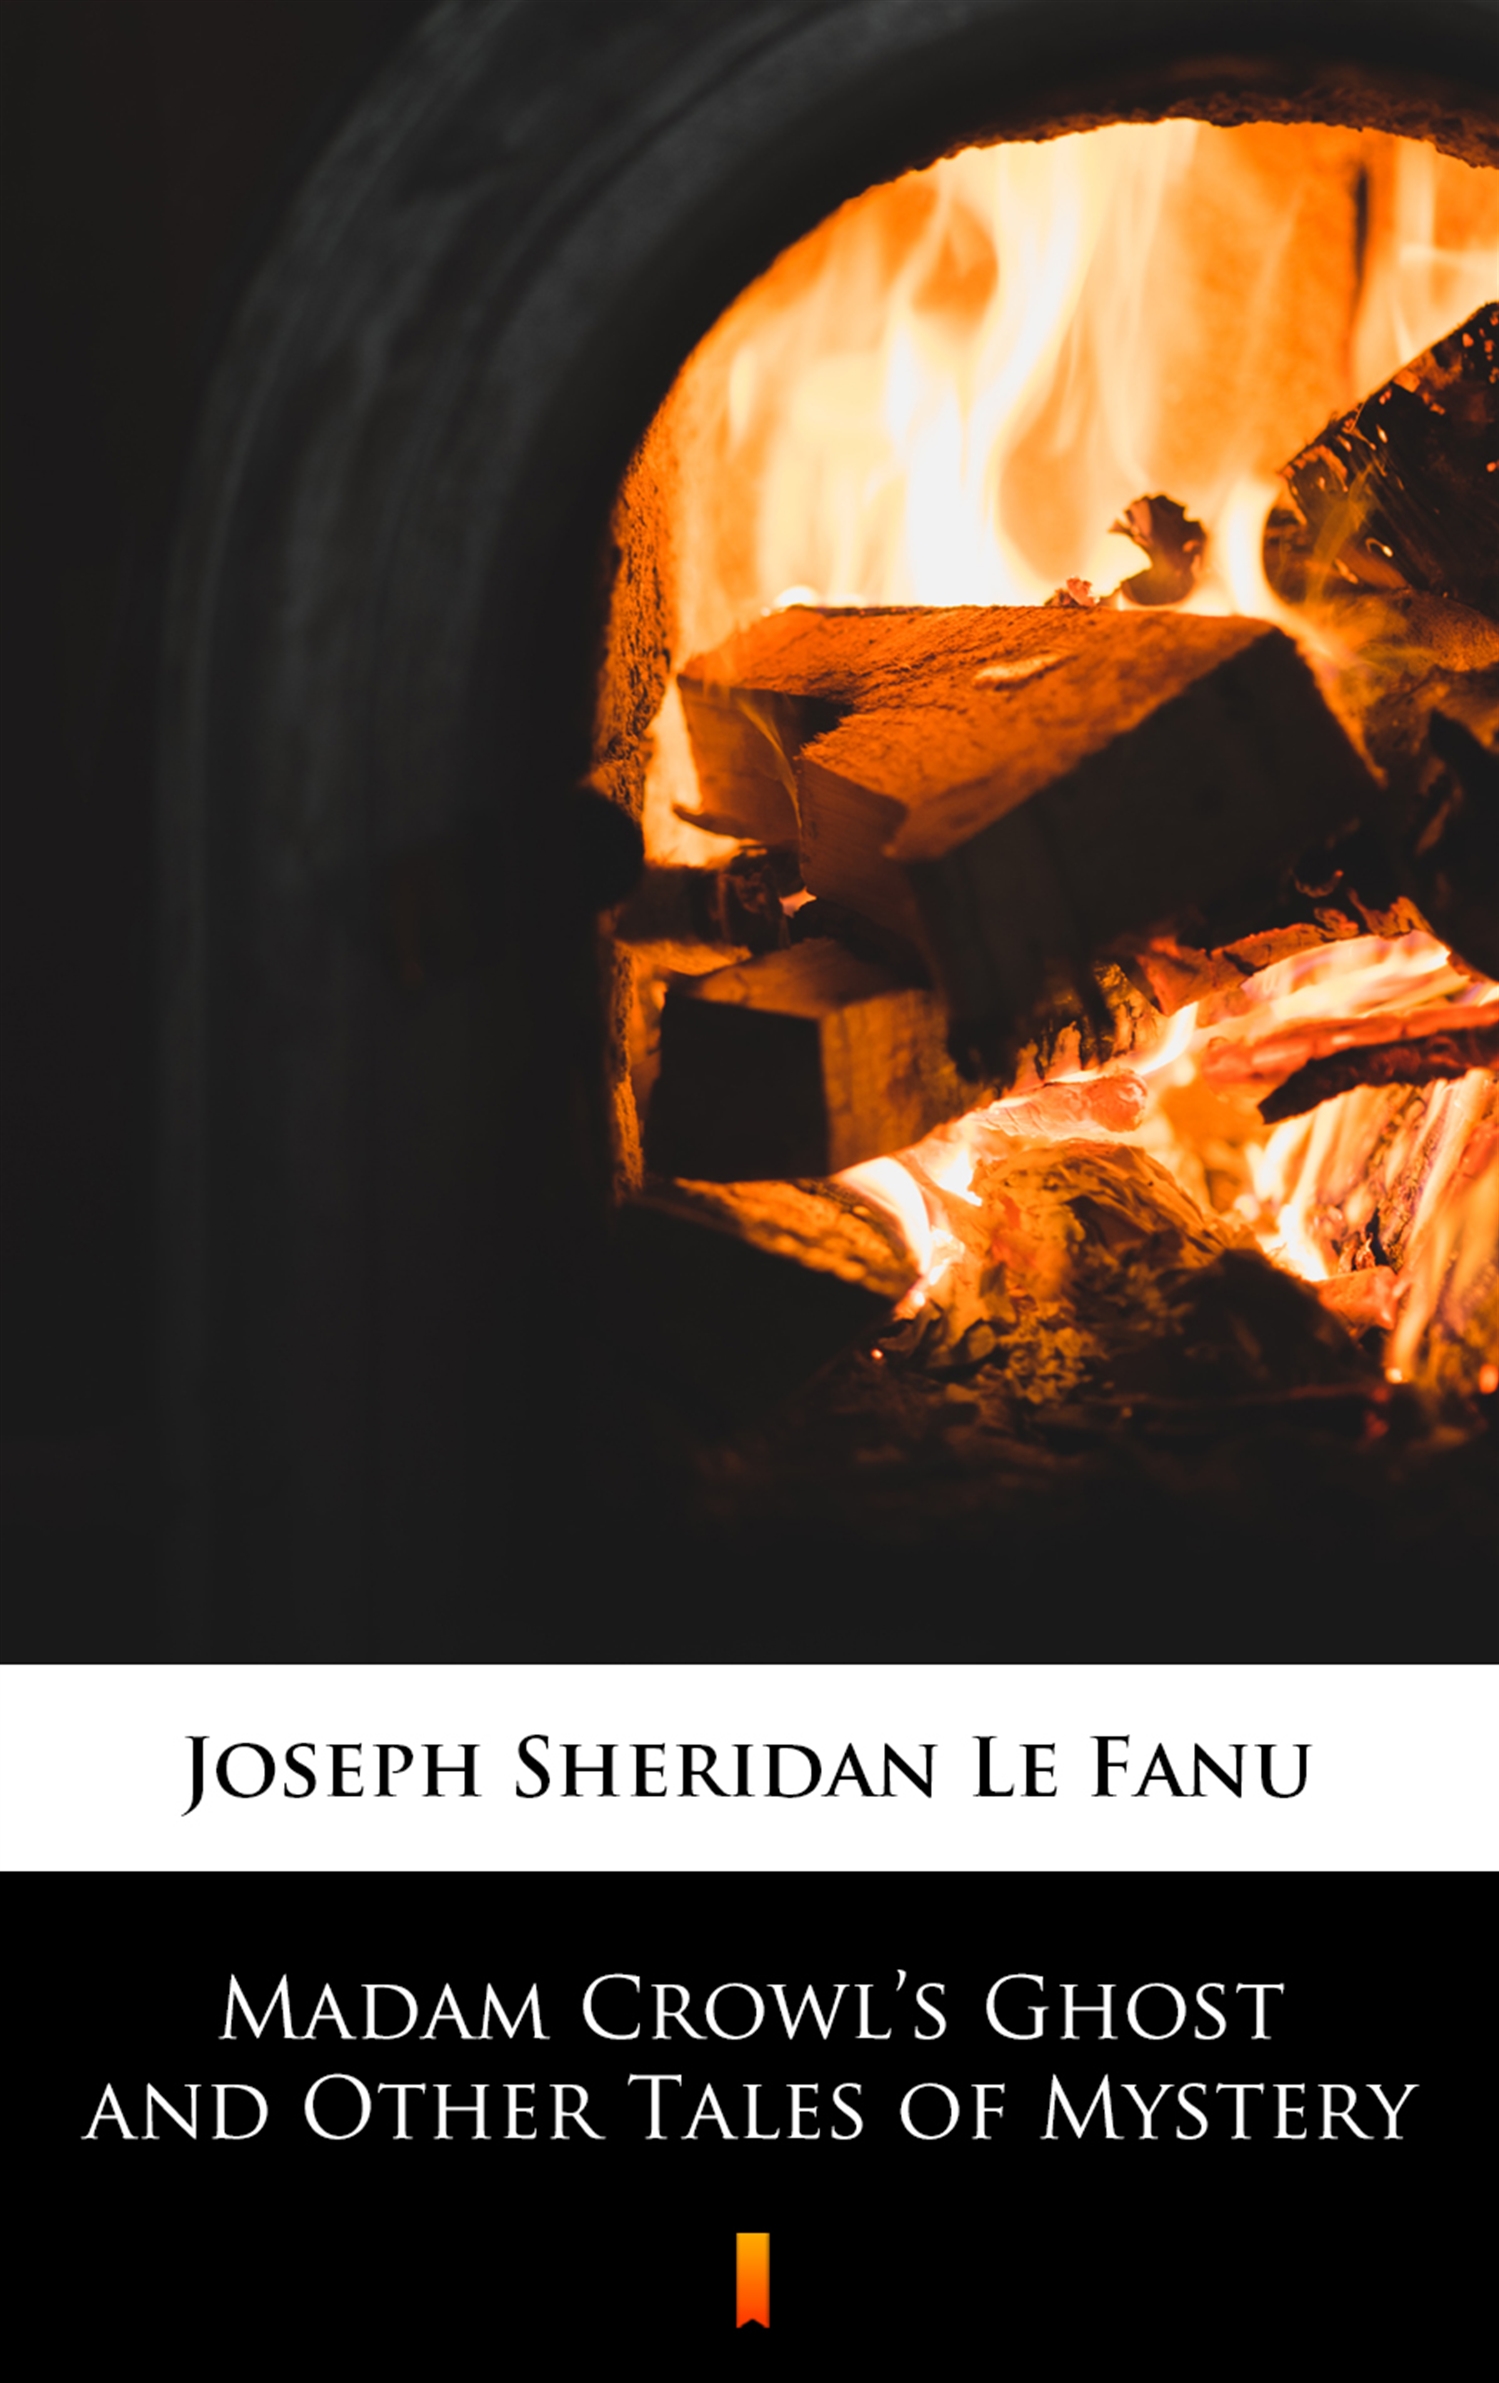 Скачать Madam Crowl’s Ghost and Other Tales of Mystery - Joseph Sheridan Le Fanu